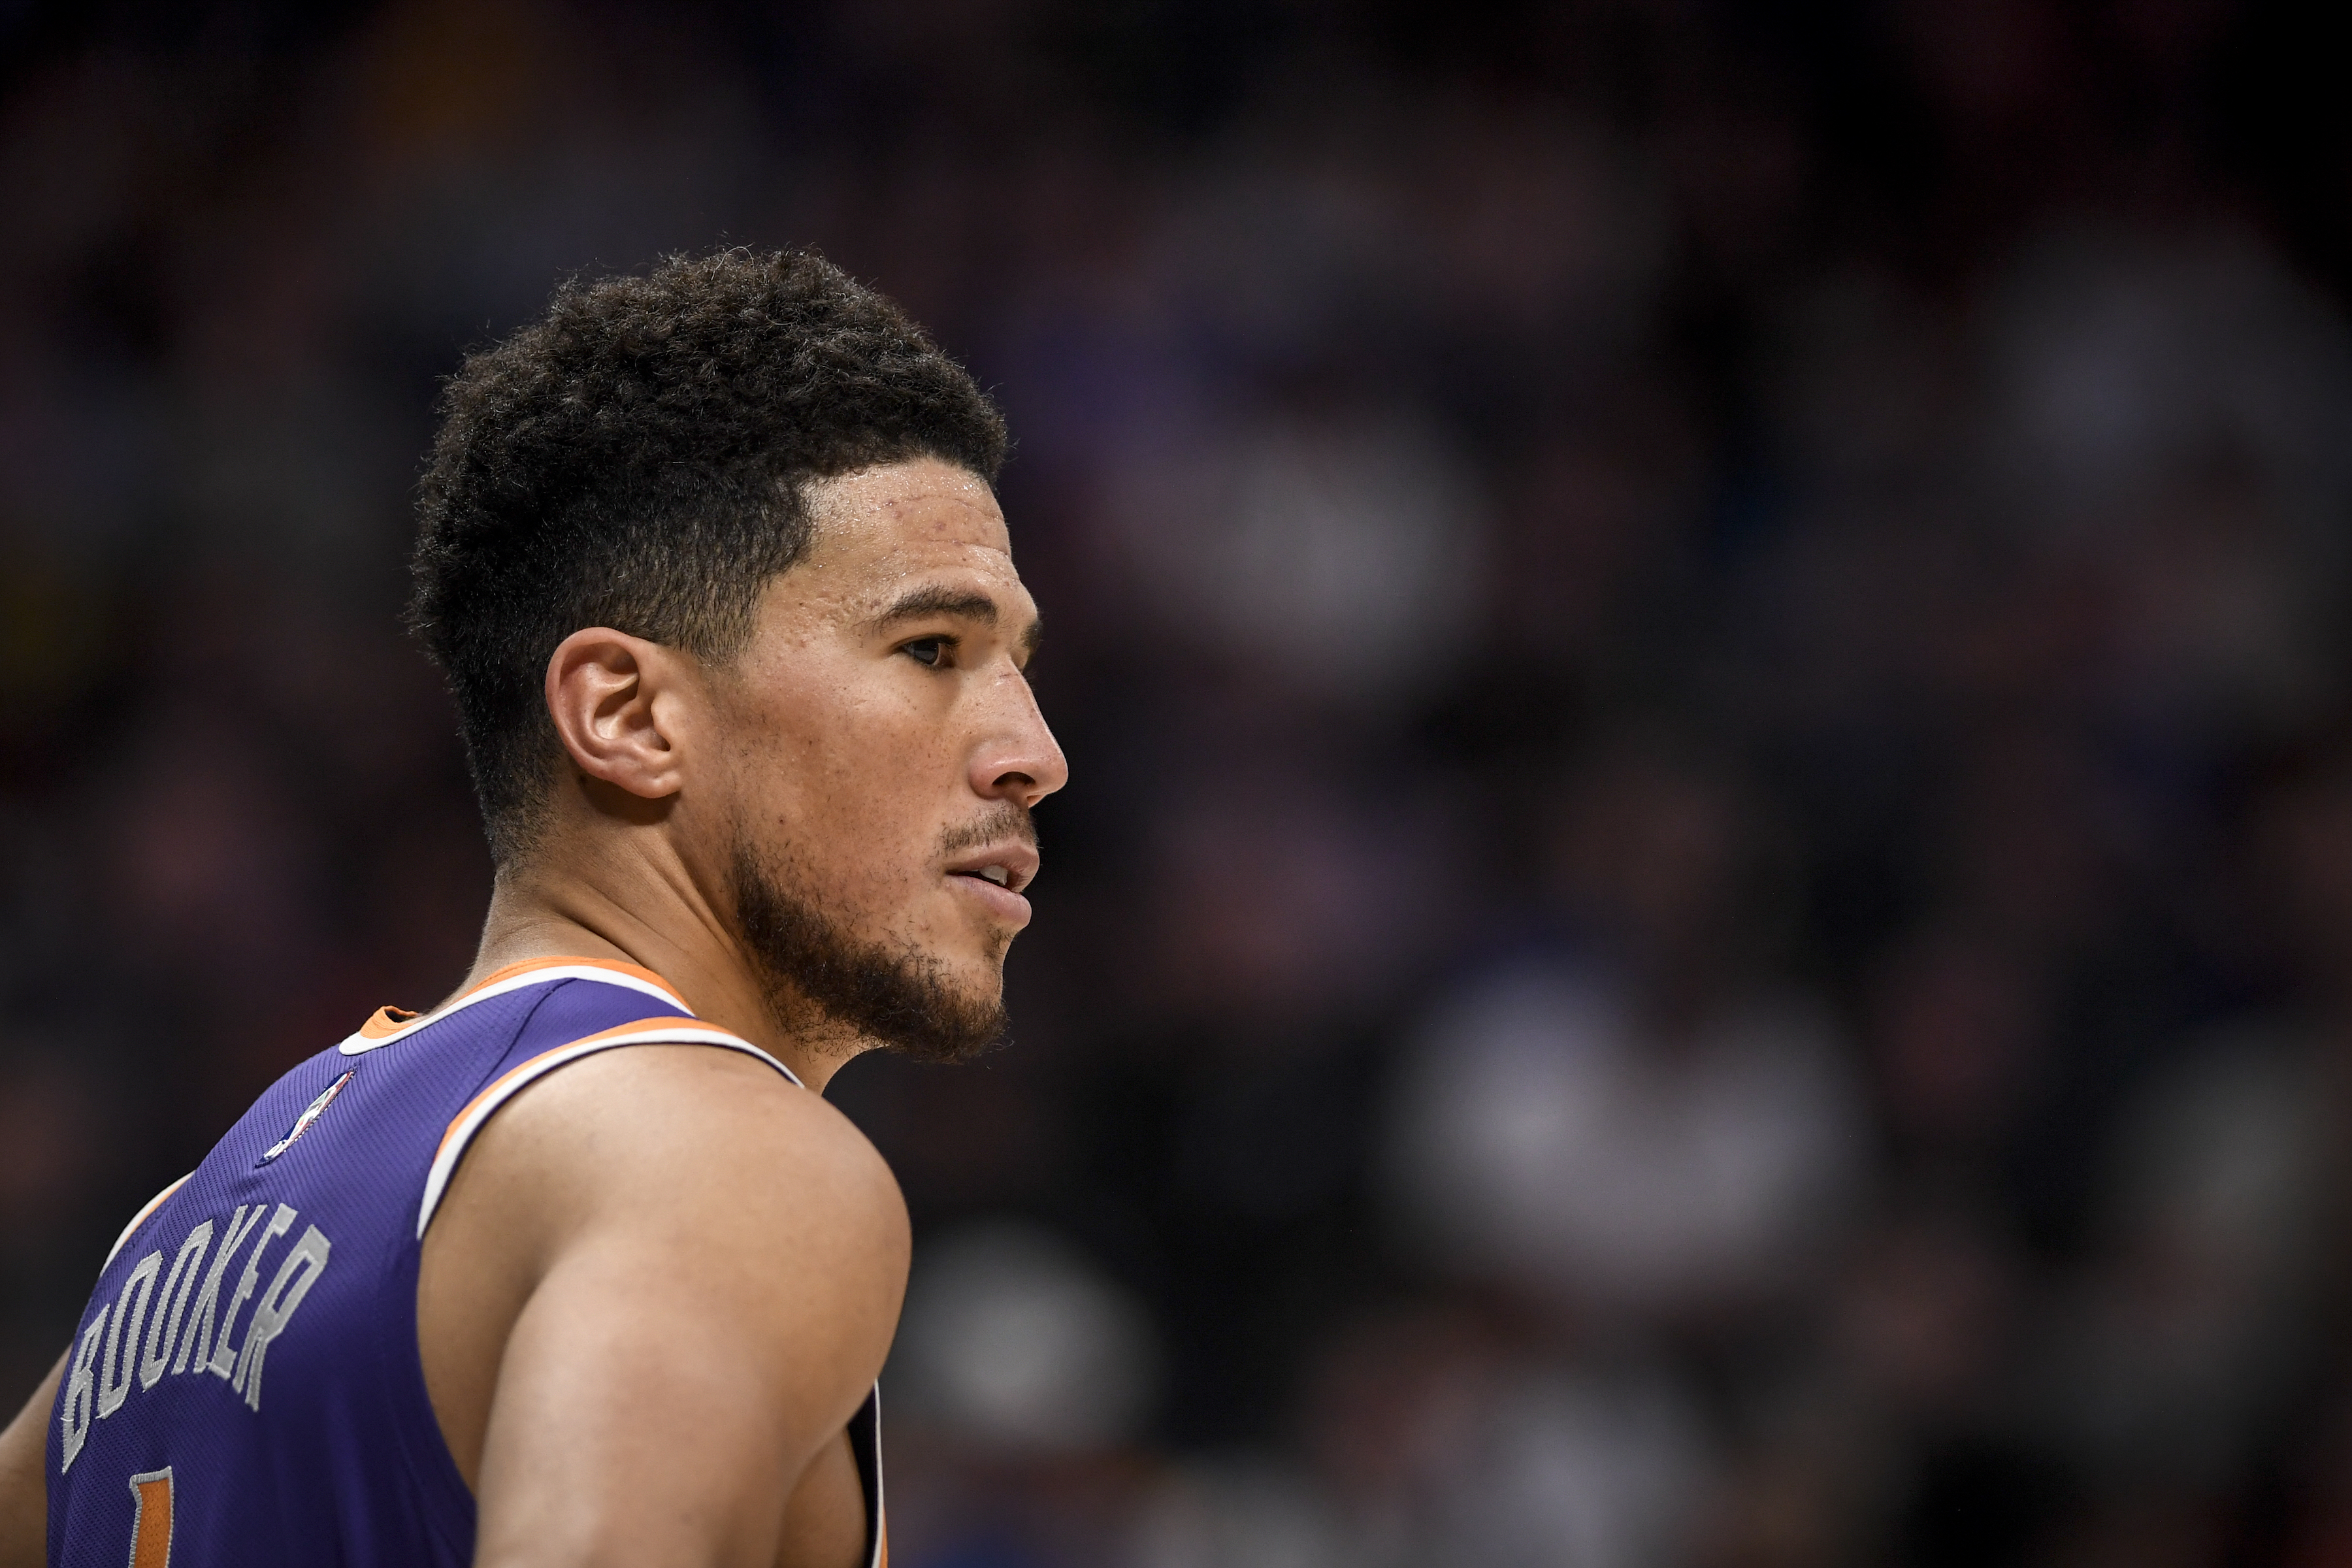 Phoenix Suns guard Devin Booker looks on during a game against the Denver Nuggets